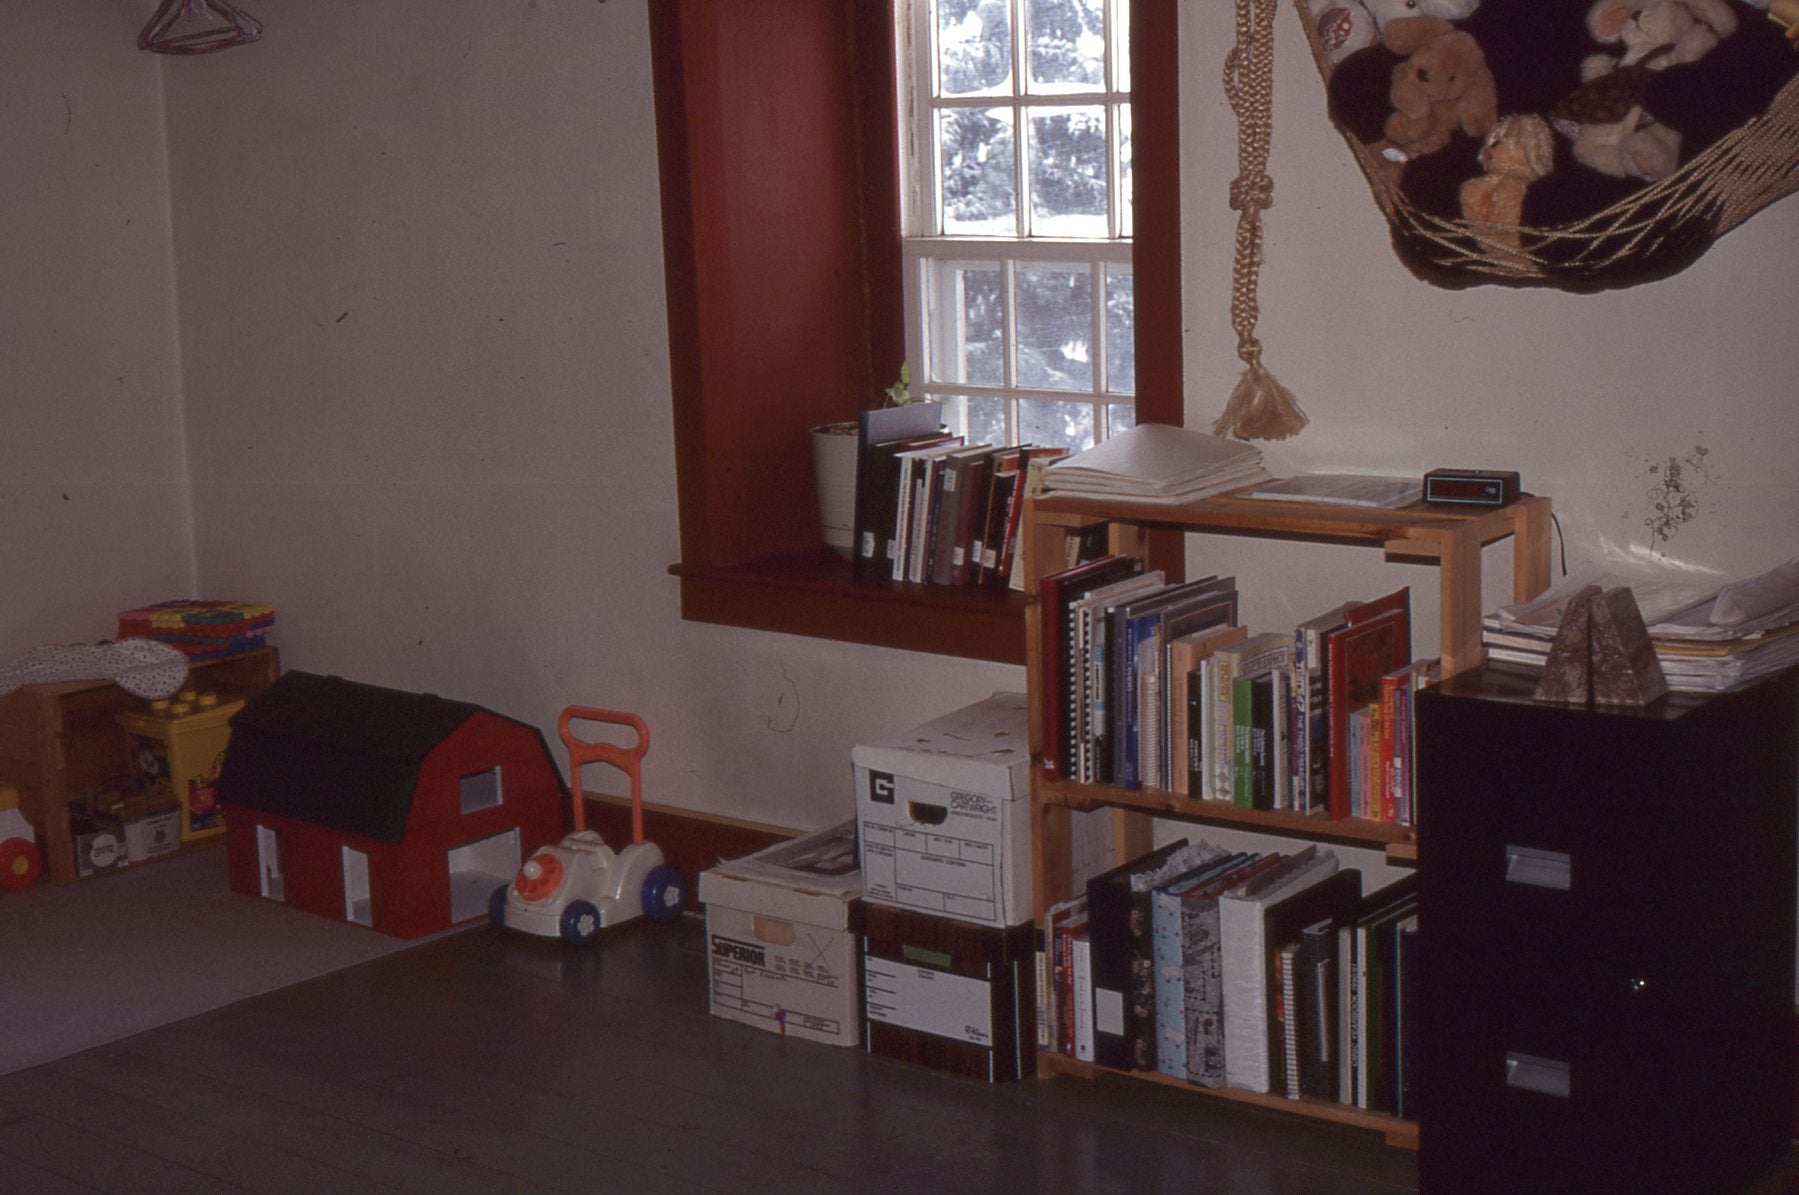 The opposite wall of Arlyn and Judith's bedroom, with books shelves, children's toys and a window